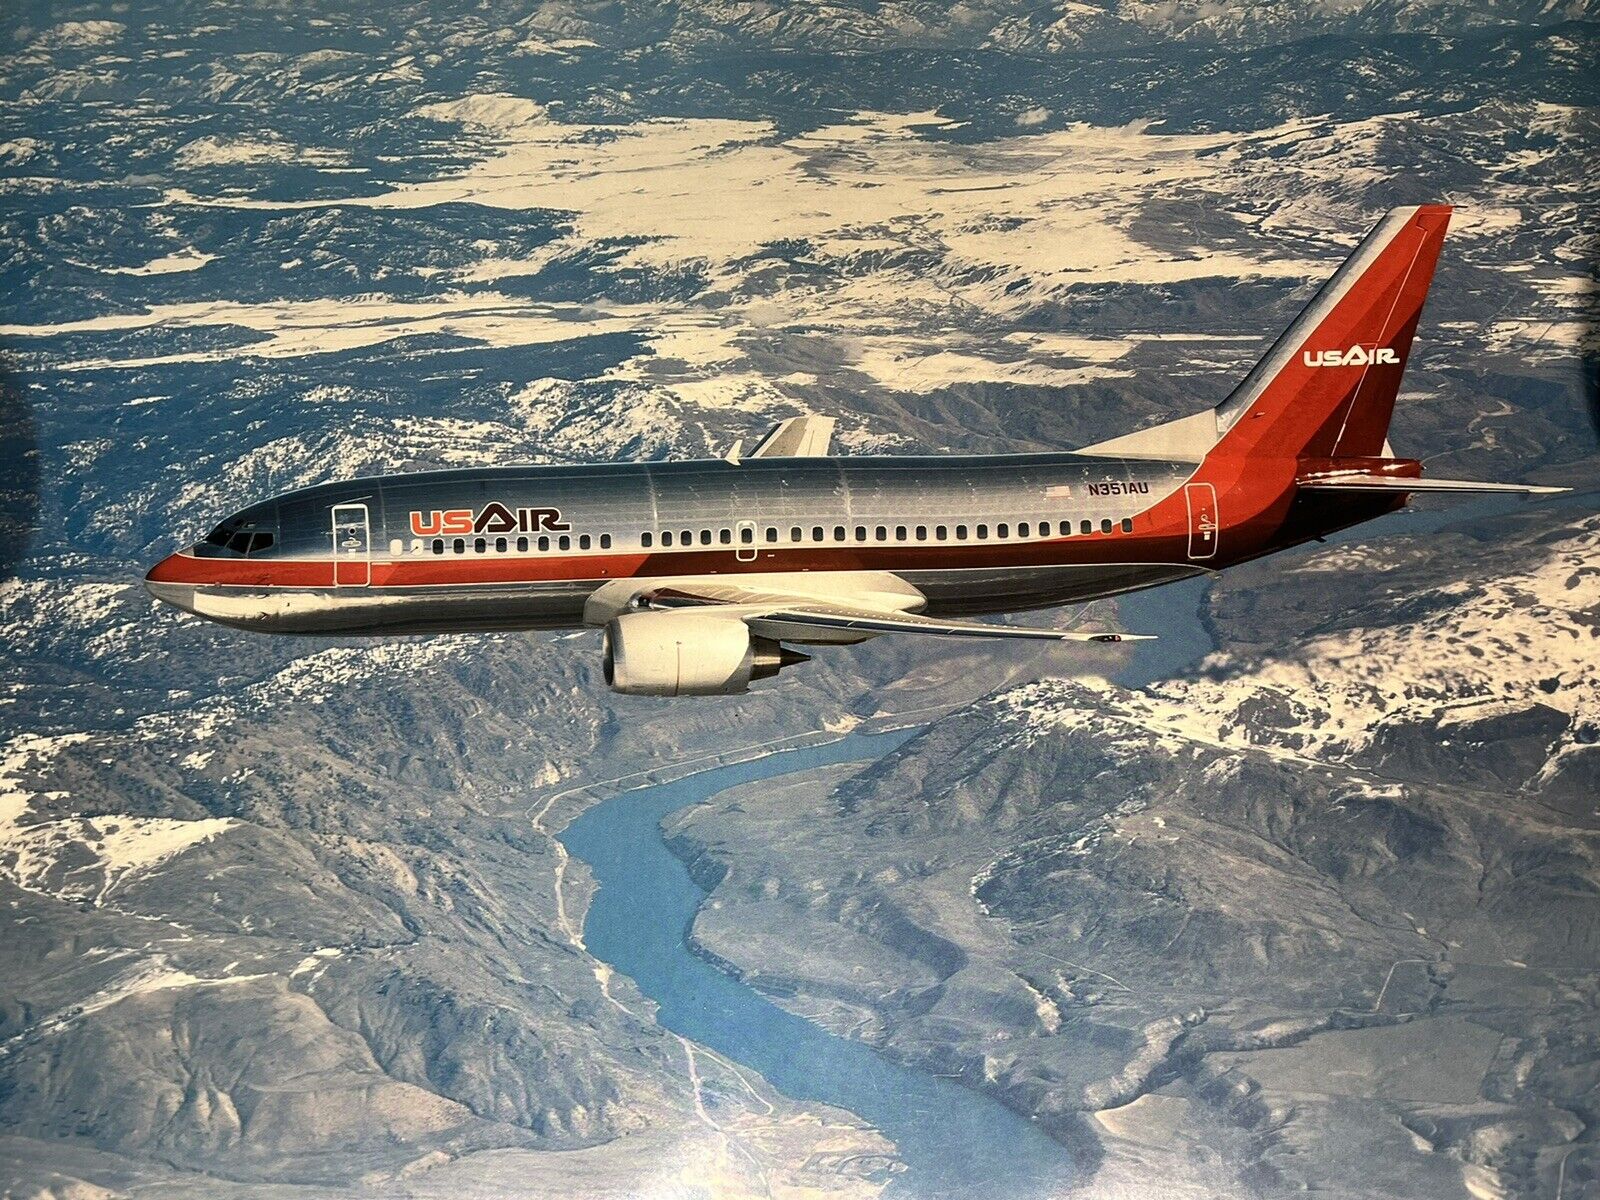 USAIR Airline 737 3B7 Photo Poster Corporate Original 1979￼ 20x16” New Old Stock